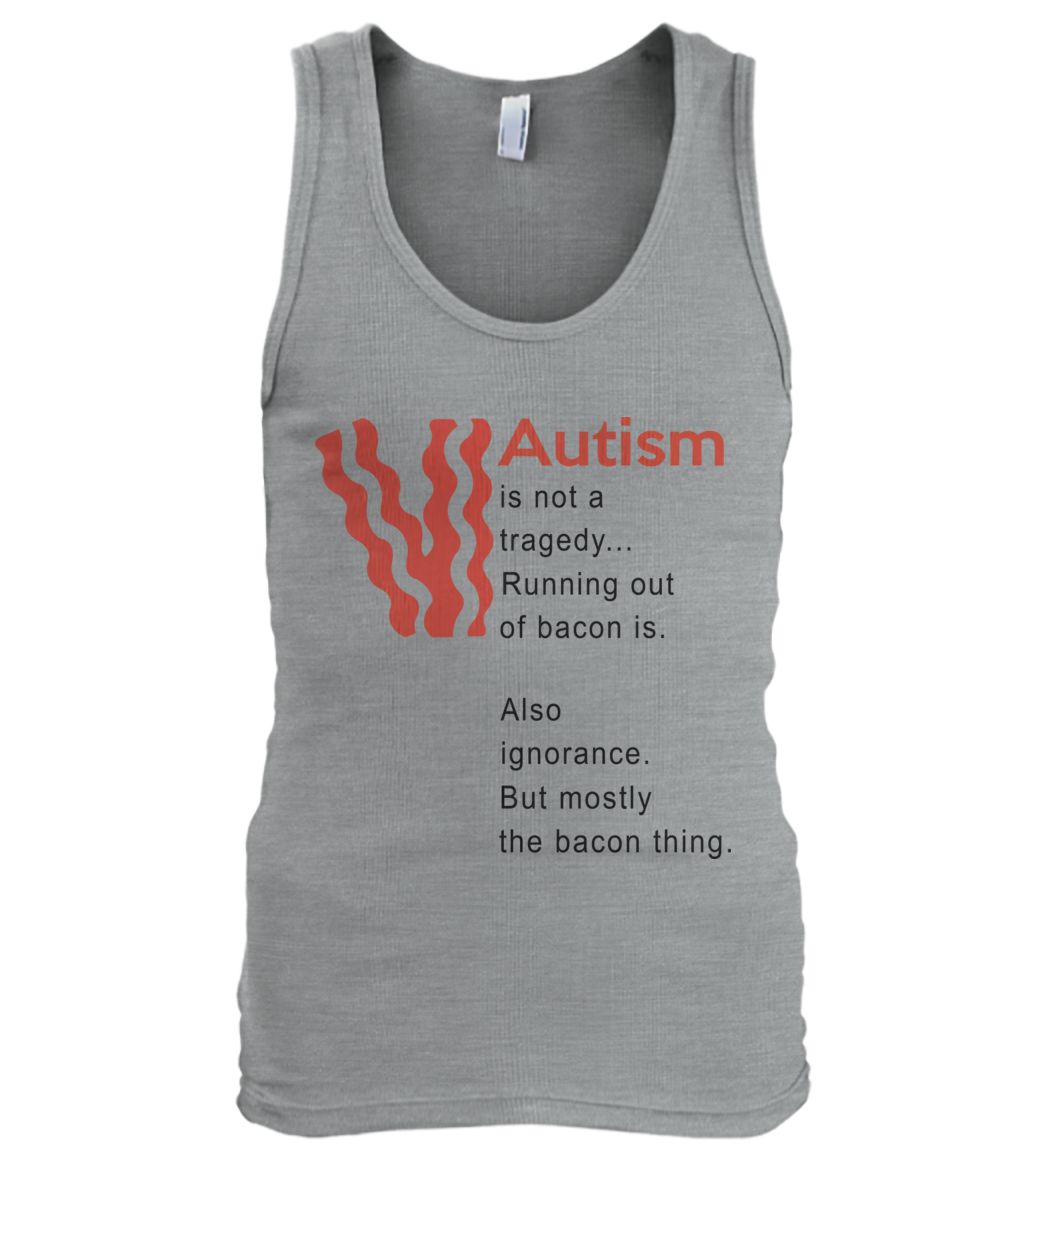 Autism is not a tragedy running out of bacon is men's tank top